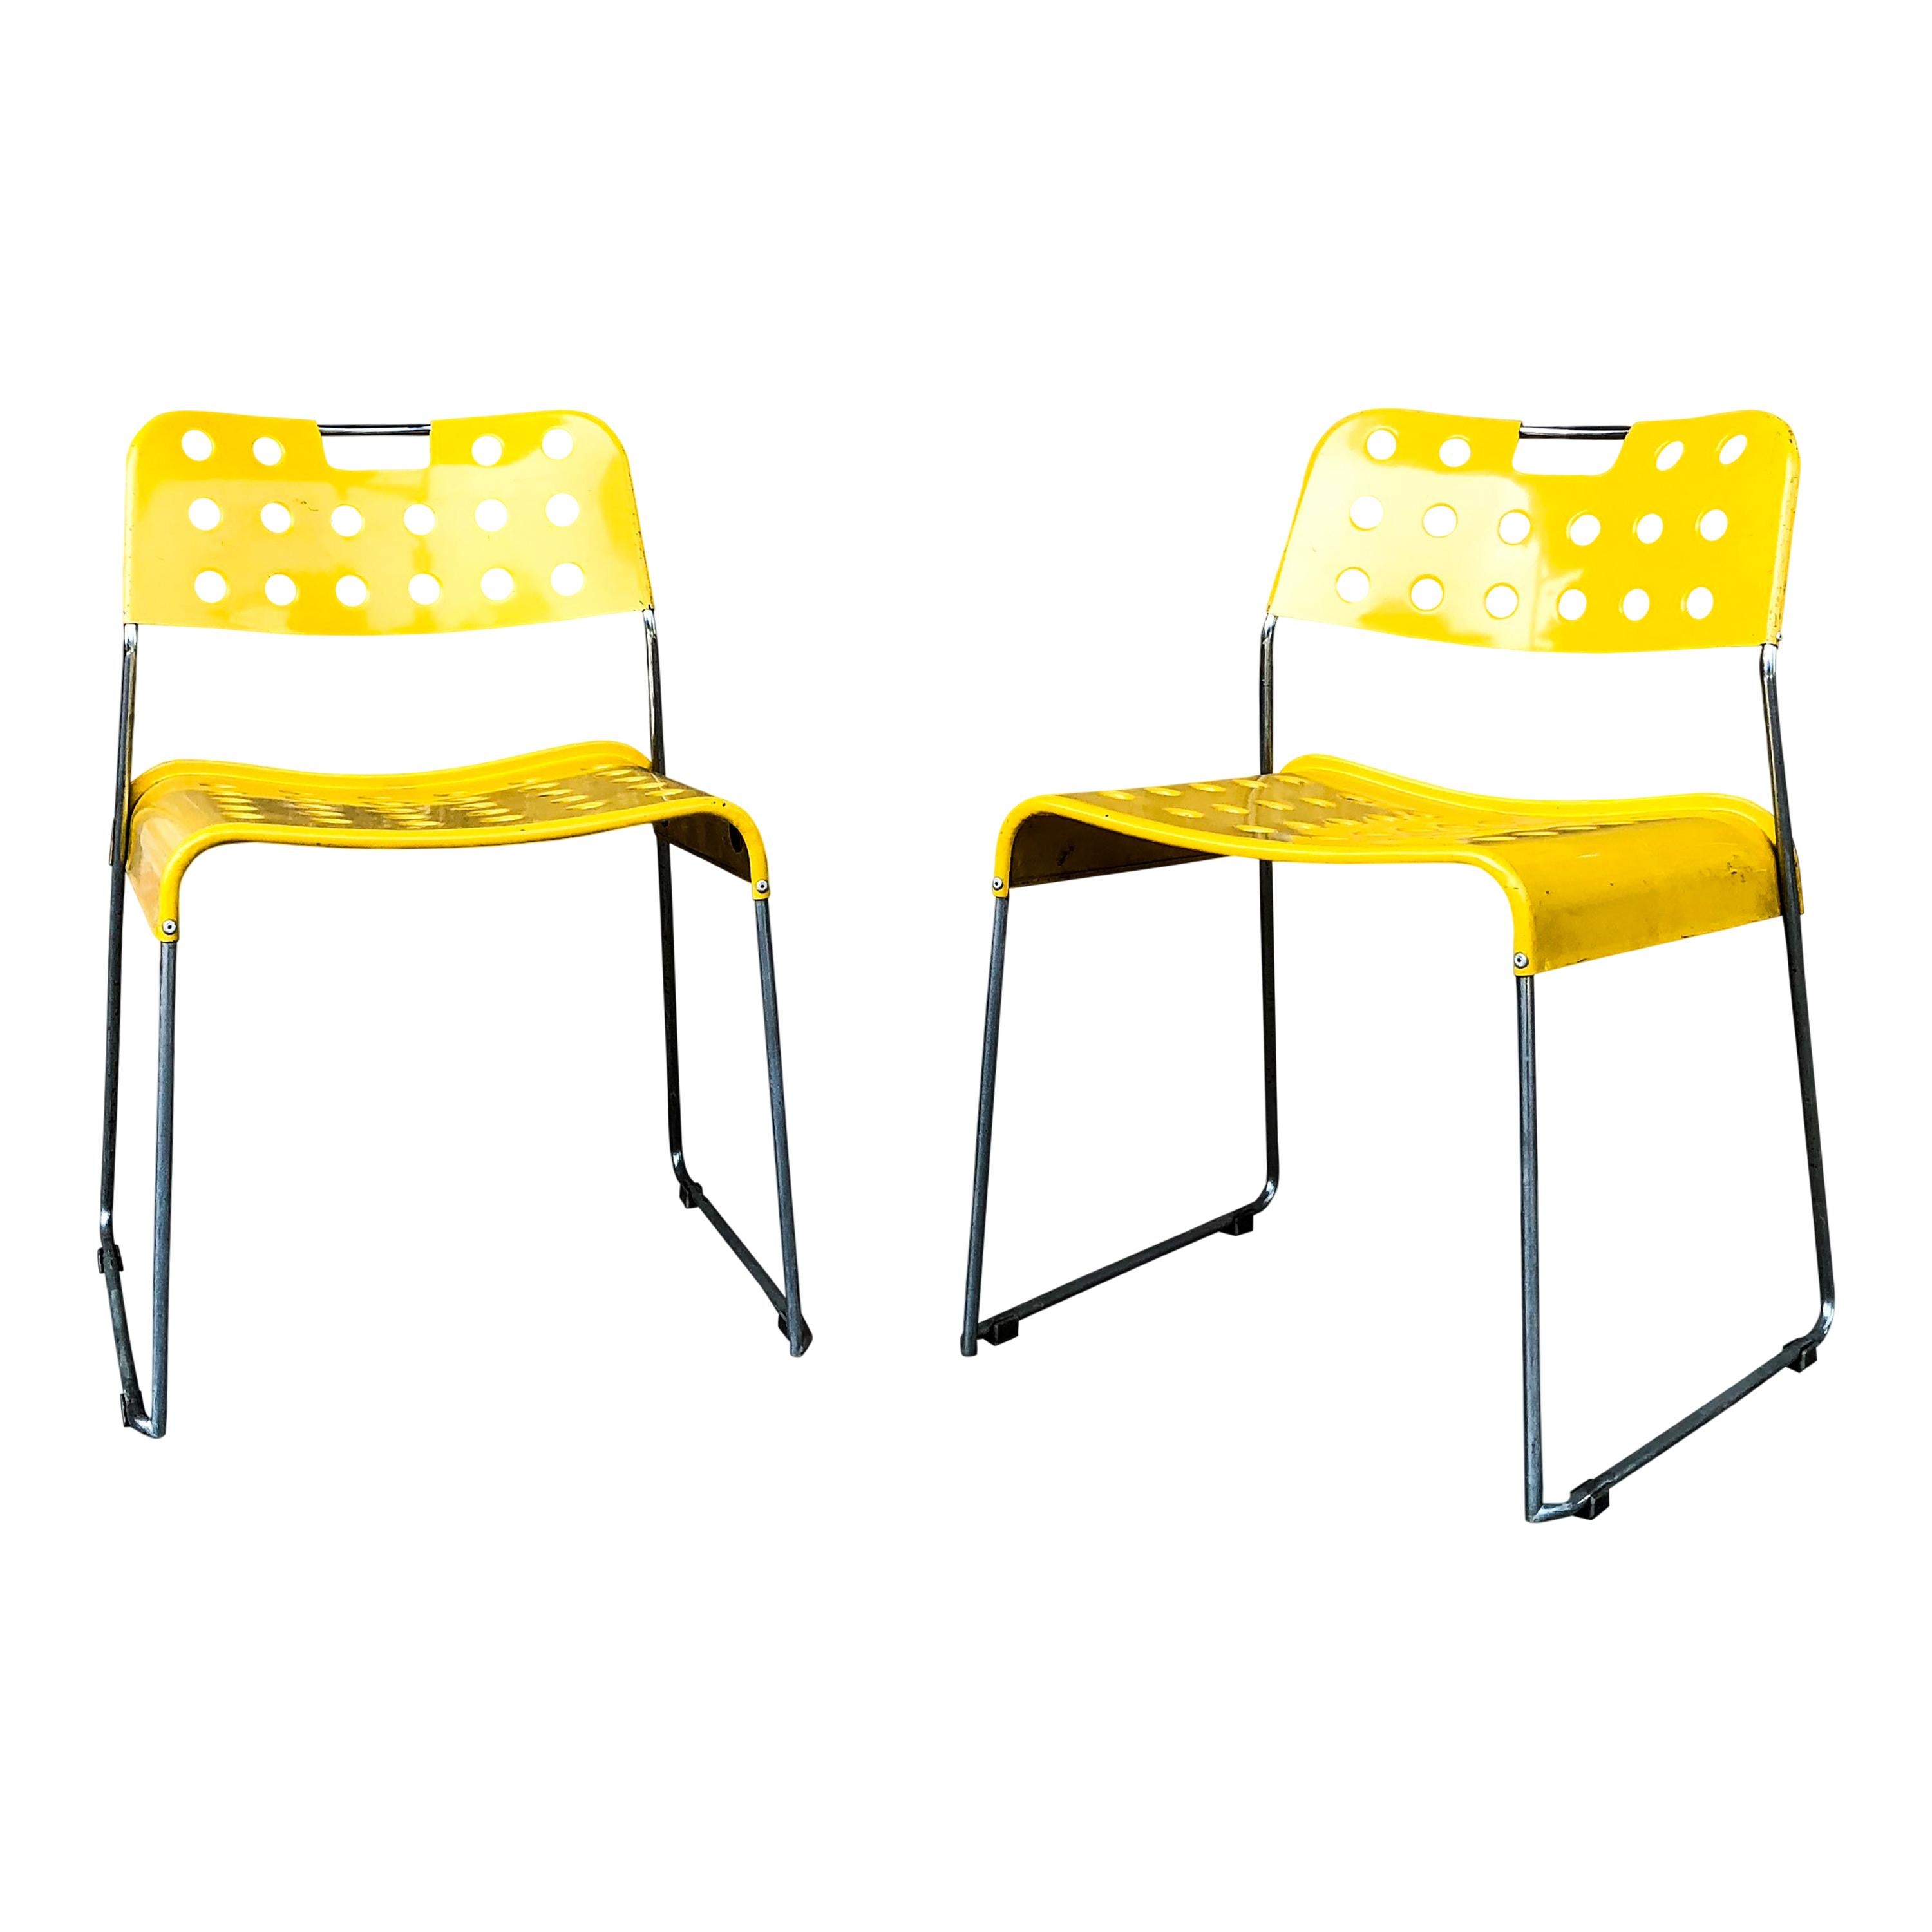 Rodney Kinsman Space Age Yellow Omstak Chair for Bieffeplast, 1971, Set of 10 For Sale 7